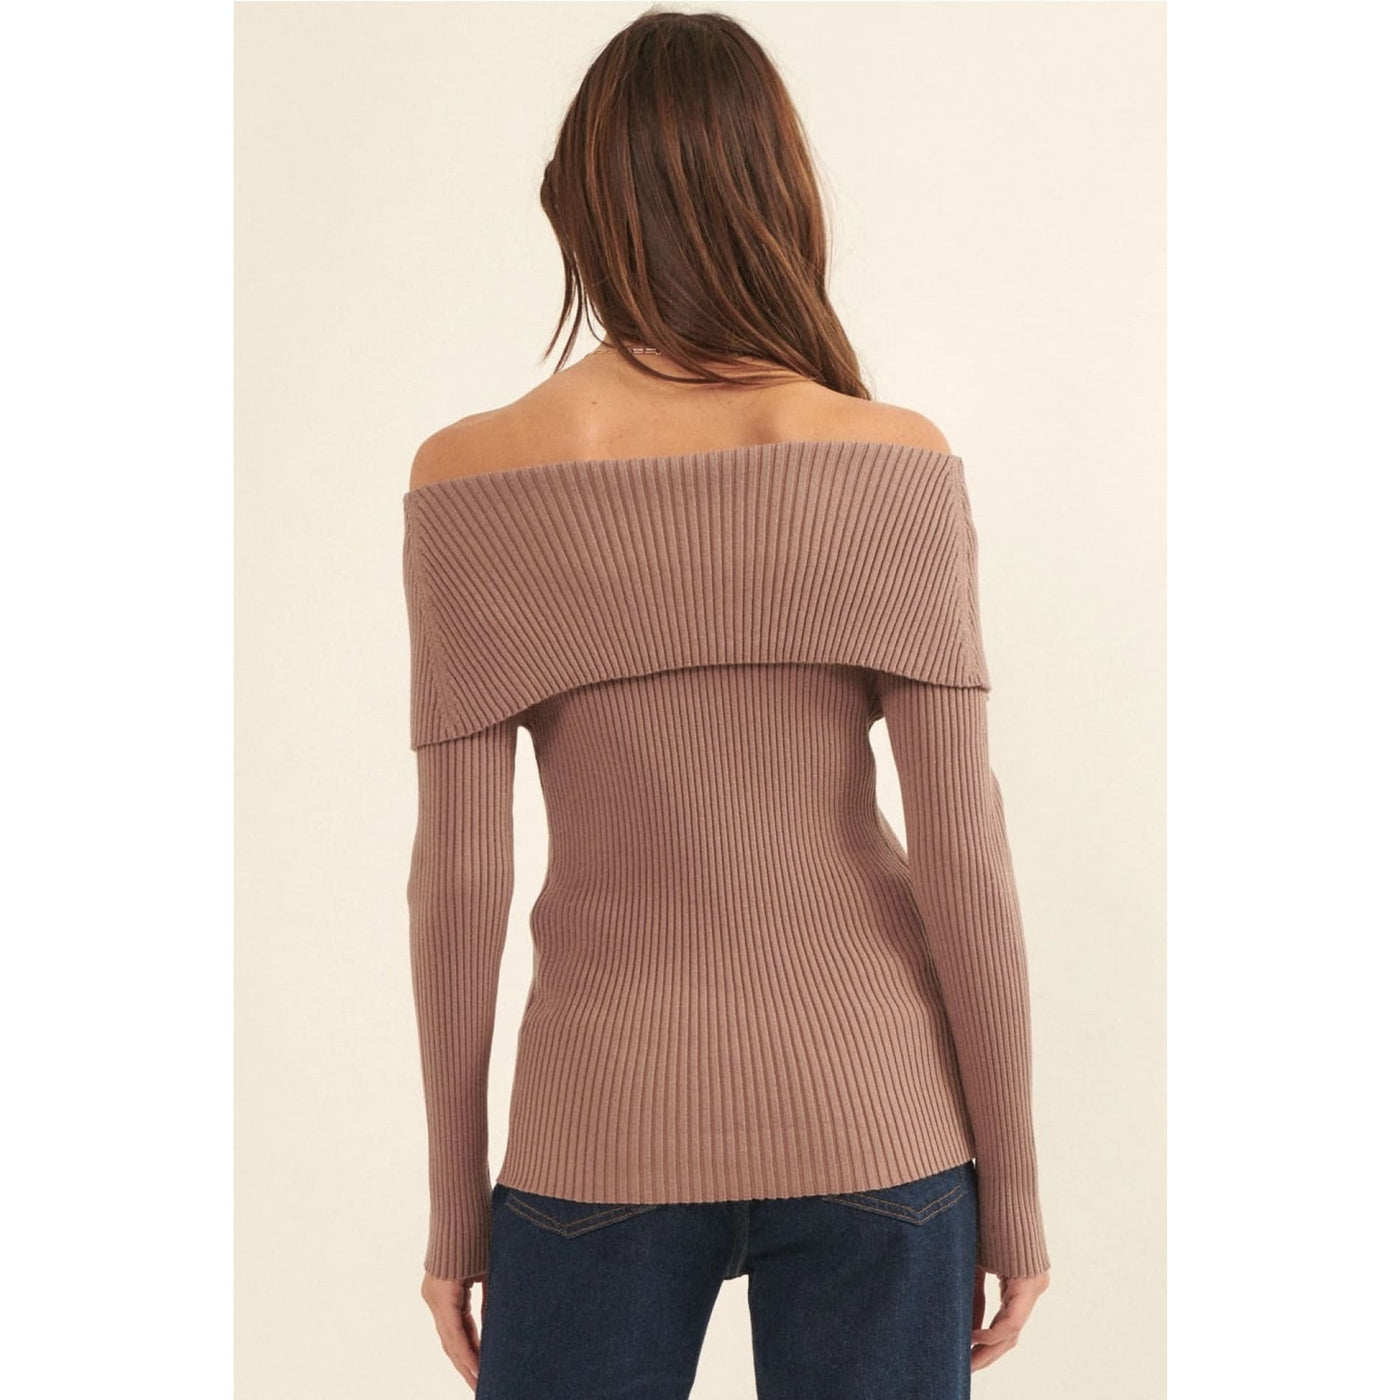 Protect My Peace Ribbed Sweater - 130 Sweaters/Cardigans